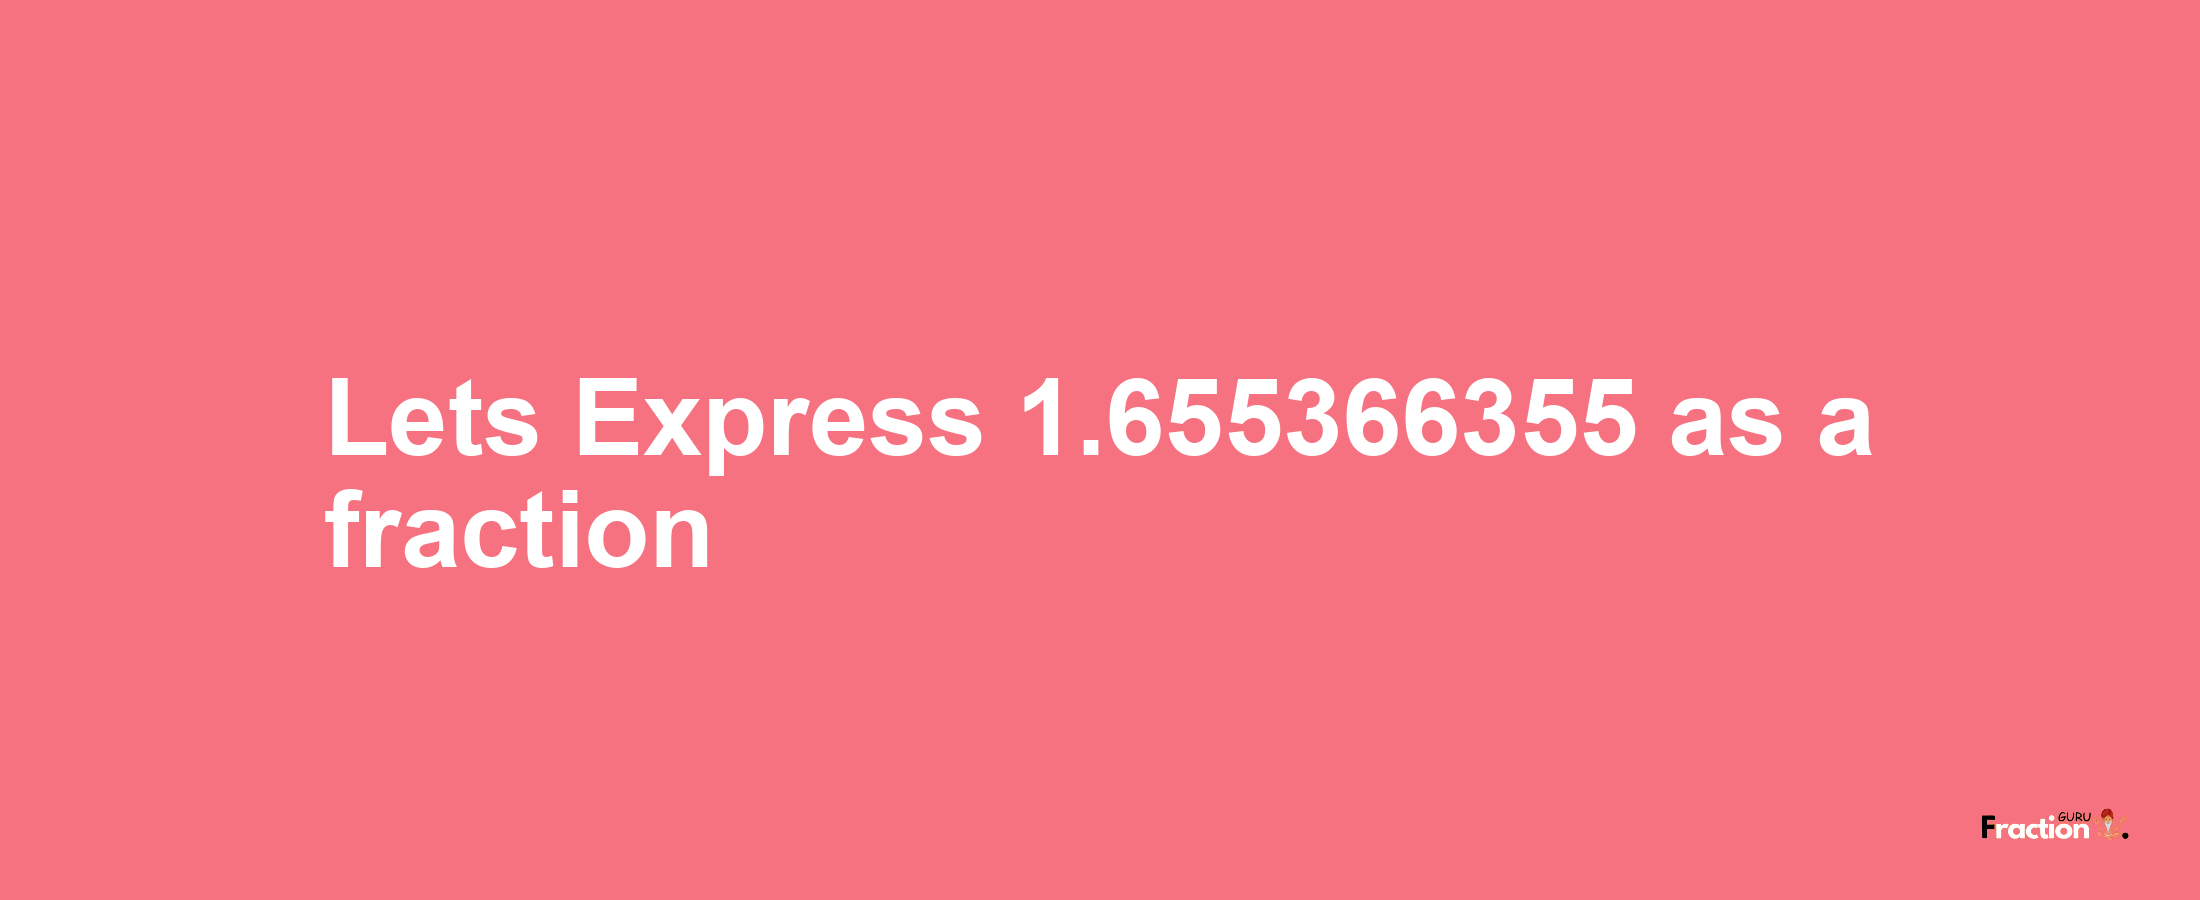 Lets Express 1.655366355 as afraction